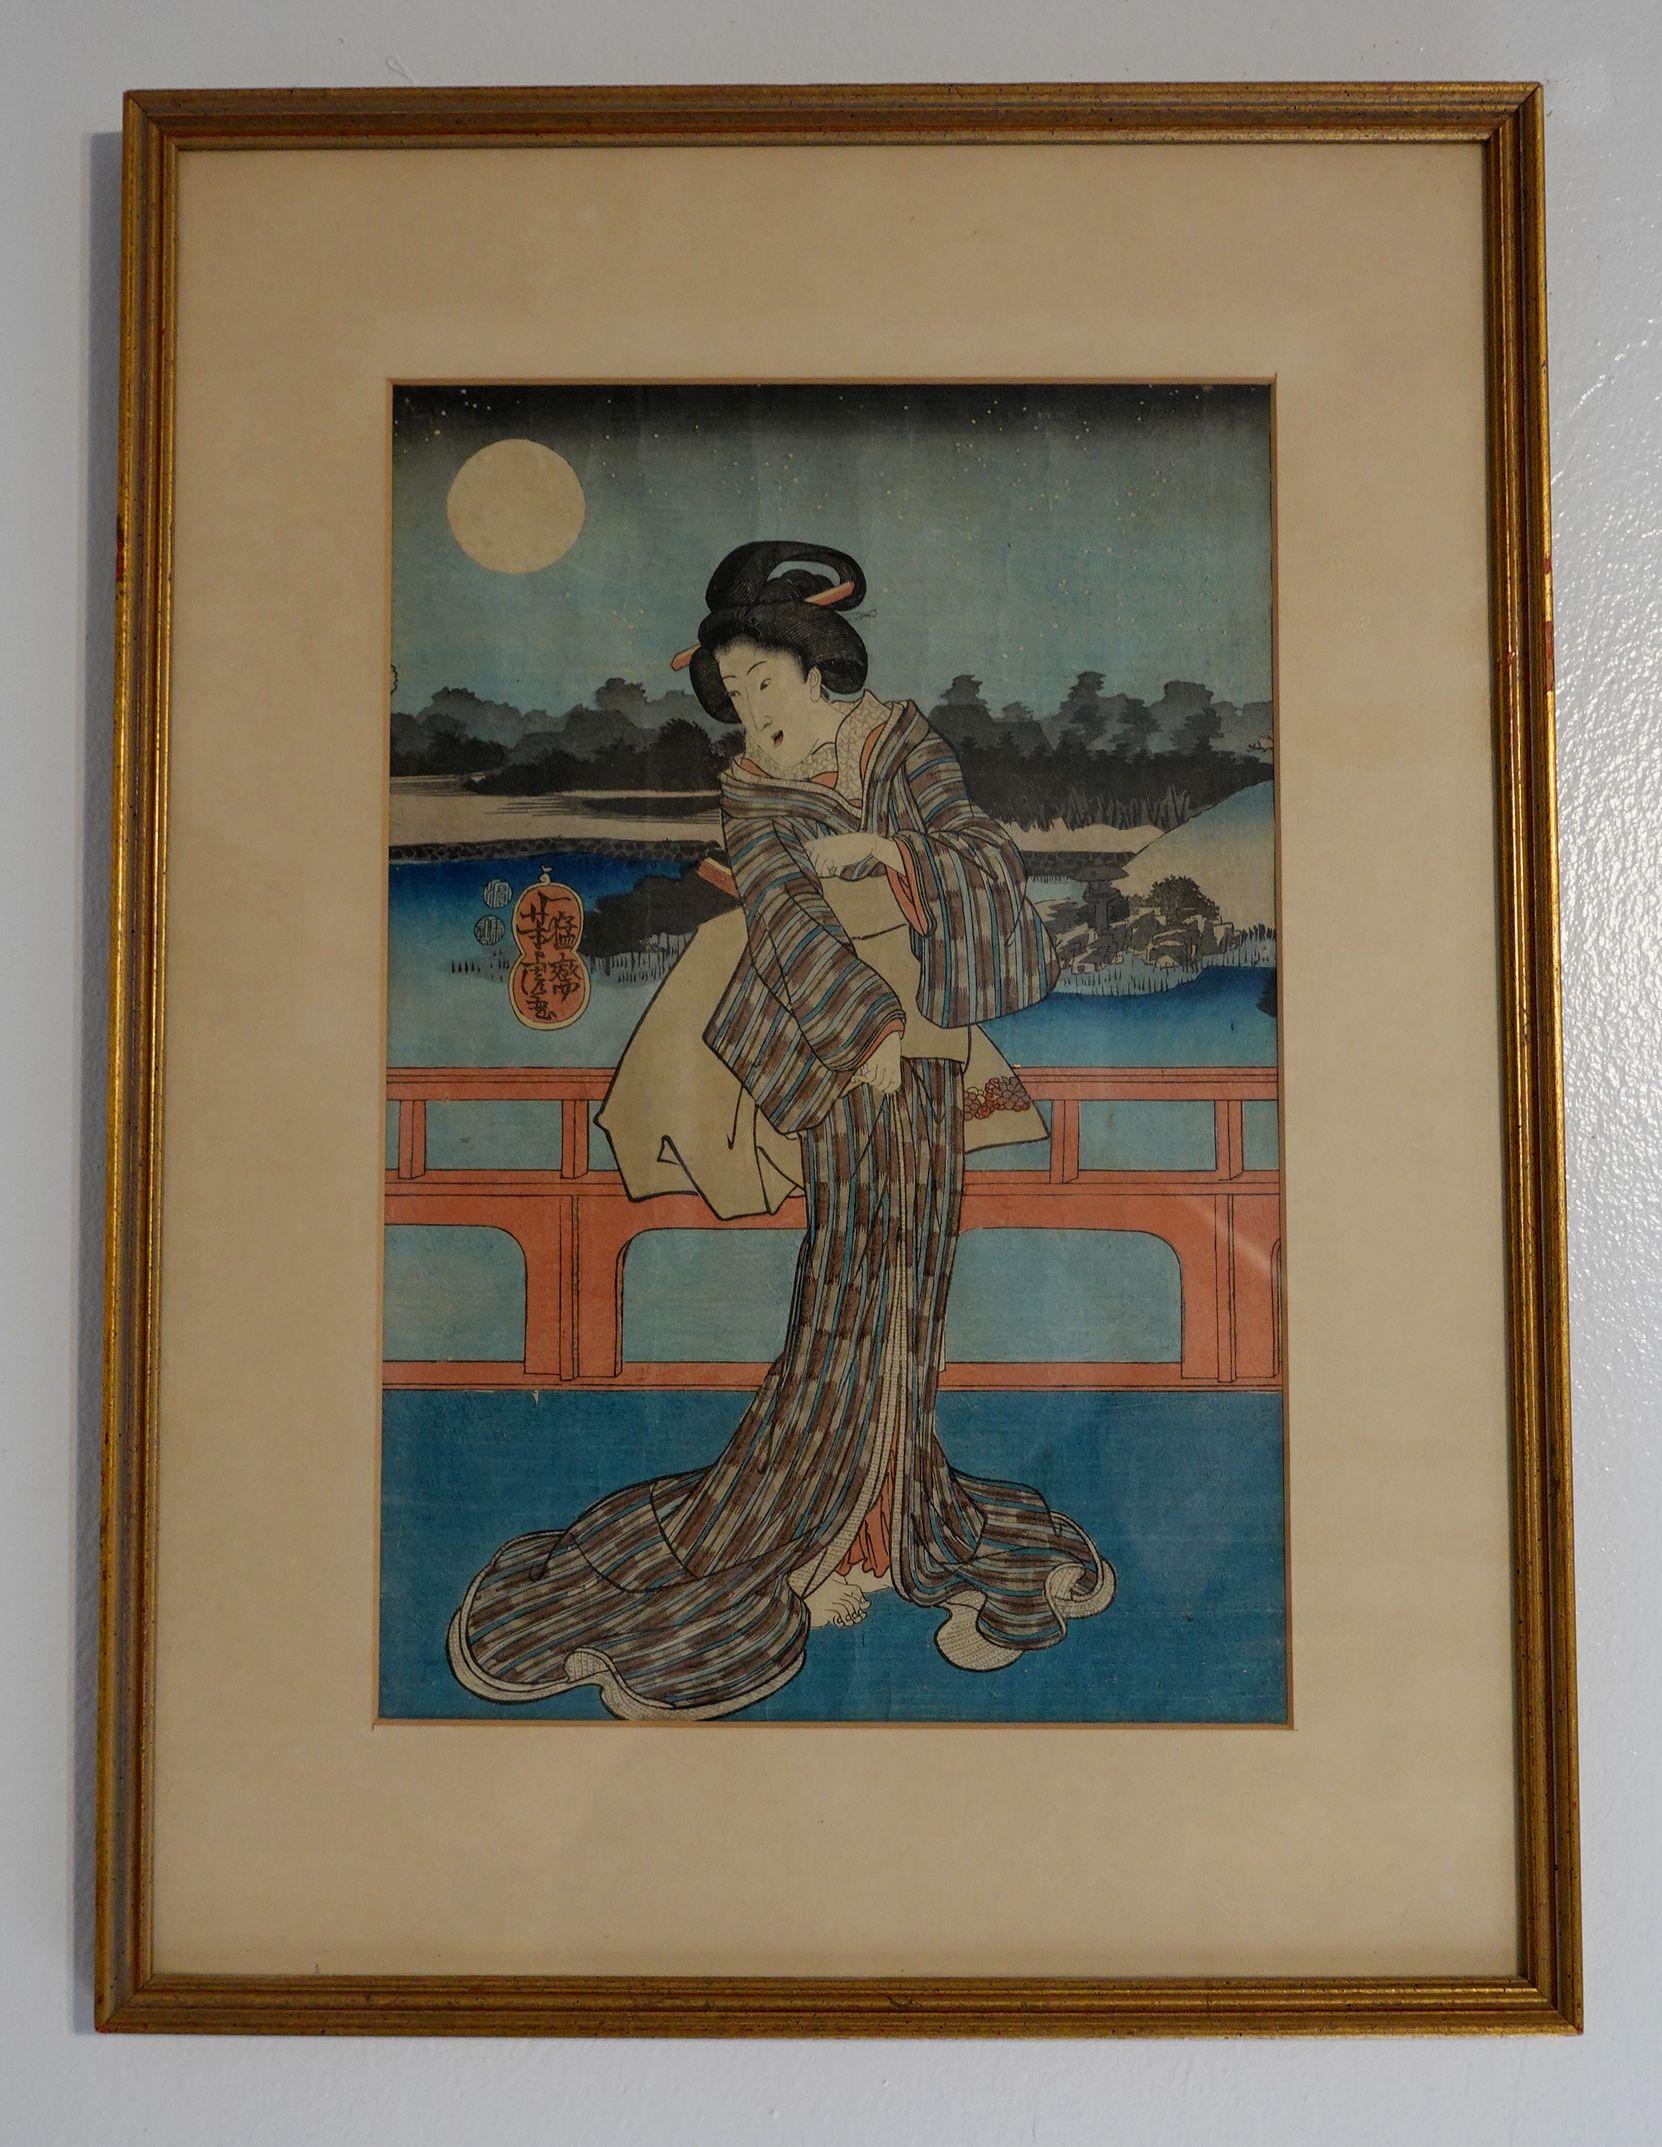 Antique Japanese woodblock print by Utagawa Yoshitora 一猛齋芳虎 (1836~1880)
depicting a night scene with a courtesan, Framed with glass.
Dimensions: with frame: 15 1/8' W x 20.5